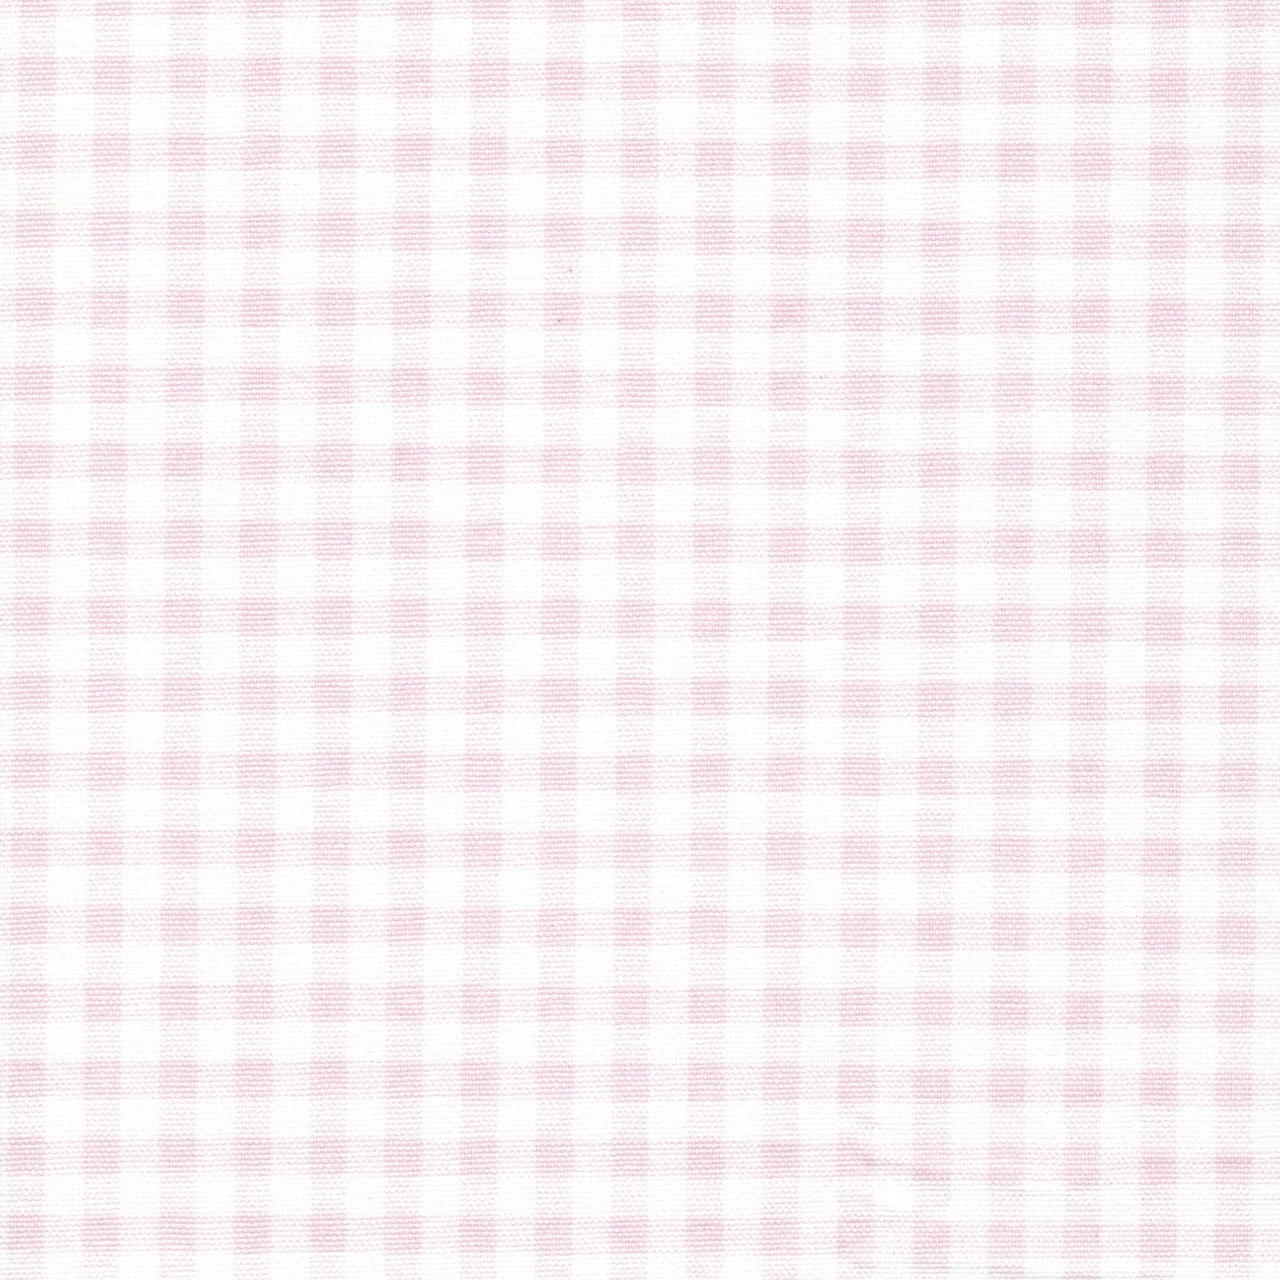 Gathered Crib Skirt in Bella Pink Large Gingham Check on White Plaid